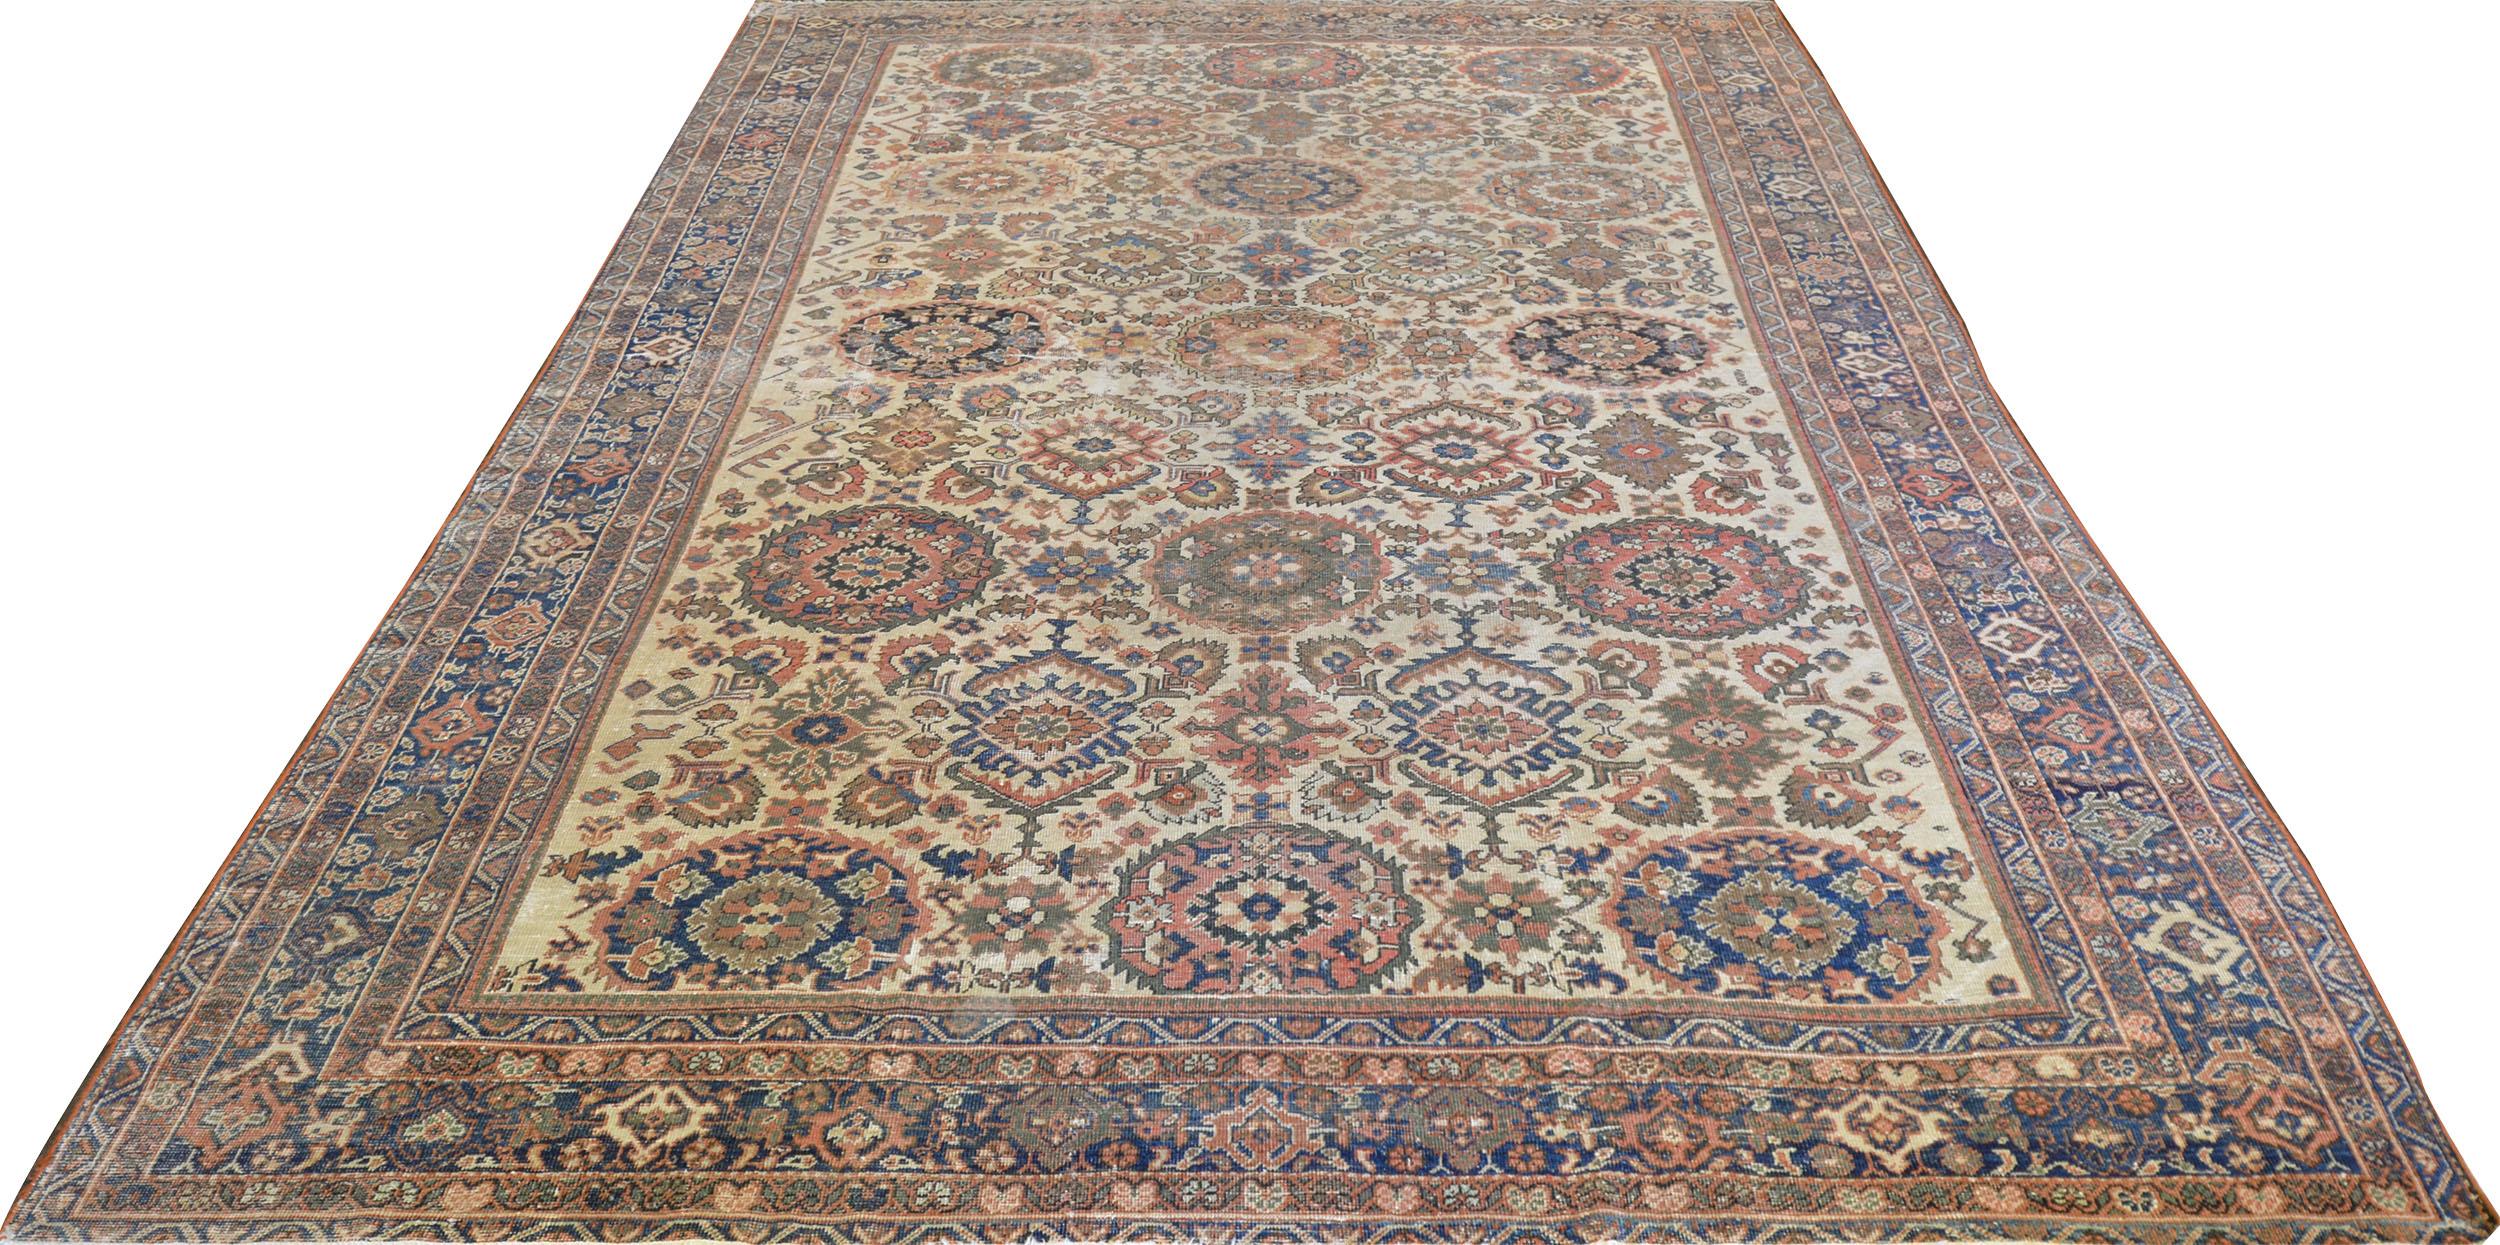 This traditional handwoven Persian Sultanabad rug has a warm cream field of regal palmette pendants checkered with further floral lozenges, and geometric motif, in a refined indigo palmette border, between a profusion of ornate floral vine and